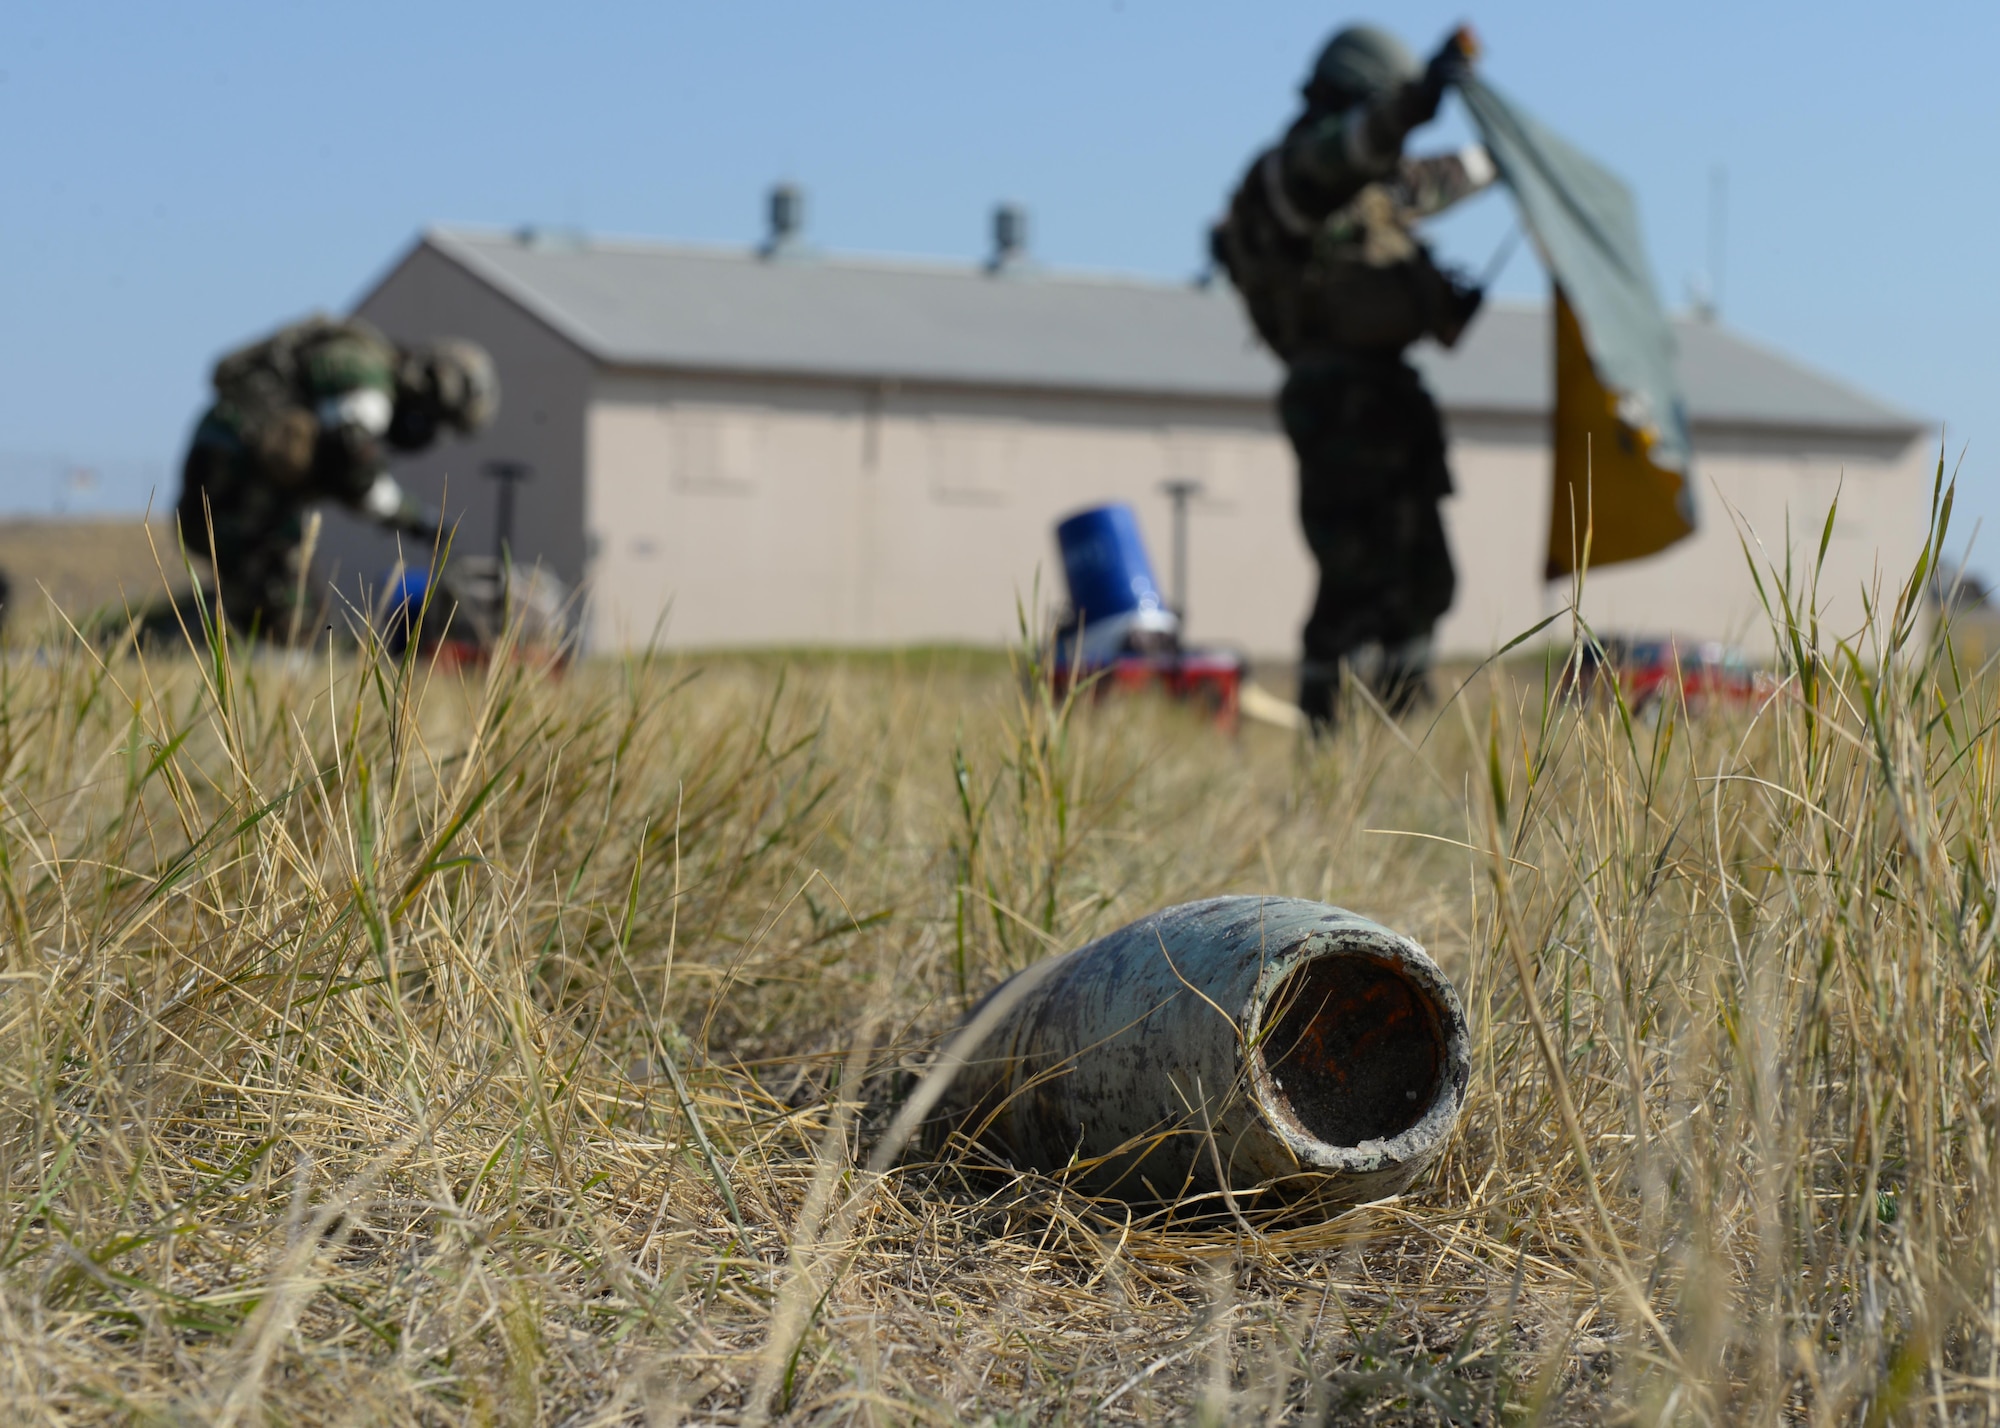 Senior Airmen Christopher Camille and Parker Davis, explosive ordnance disposal technicians assigned to the 28th Civil Engineer Squadron, build a decontamination station during an EOD Team of the Year competition at Ellsworth Air Force Base, S.D., Sept. 12, 2017. The decontamination scenario was the only non-timed event out of eight scenarios that occurred during the competition. (U.S. Air Force photo by Airman Nicolas Z. Erwin)